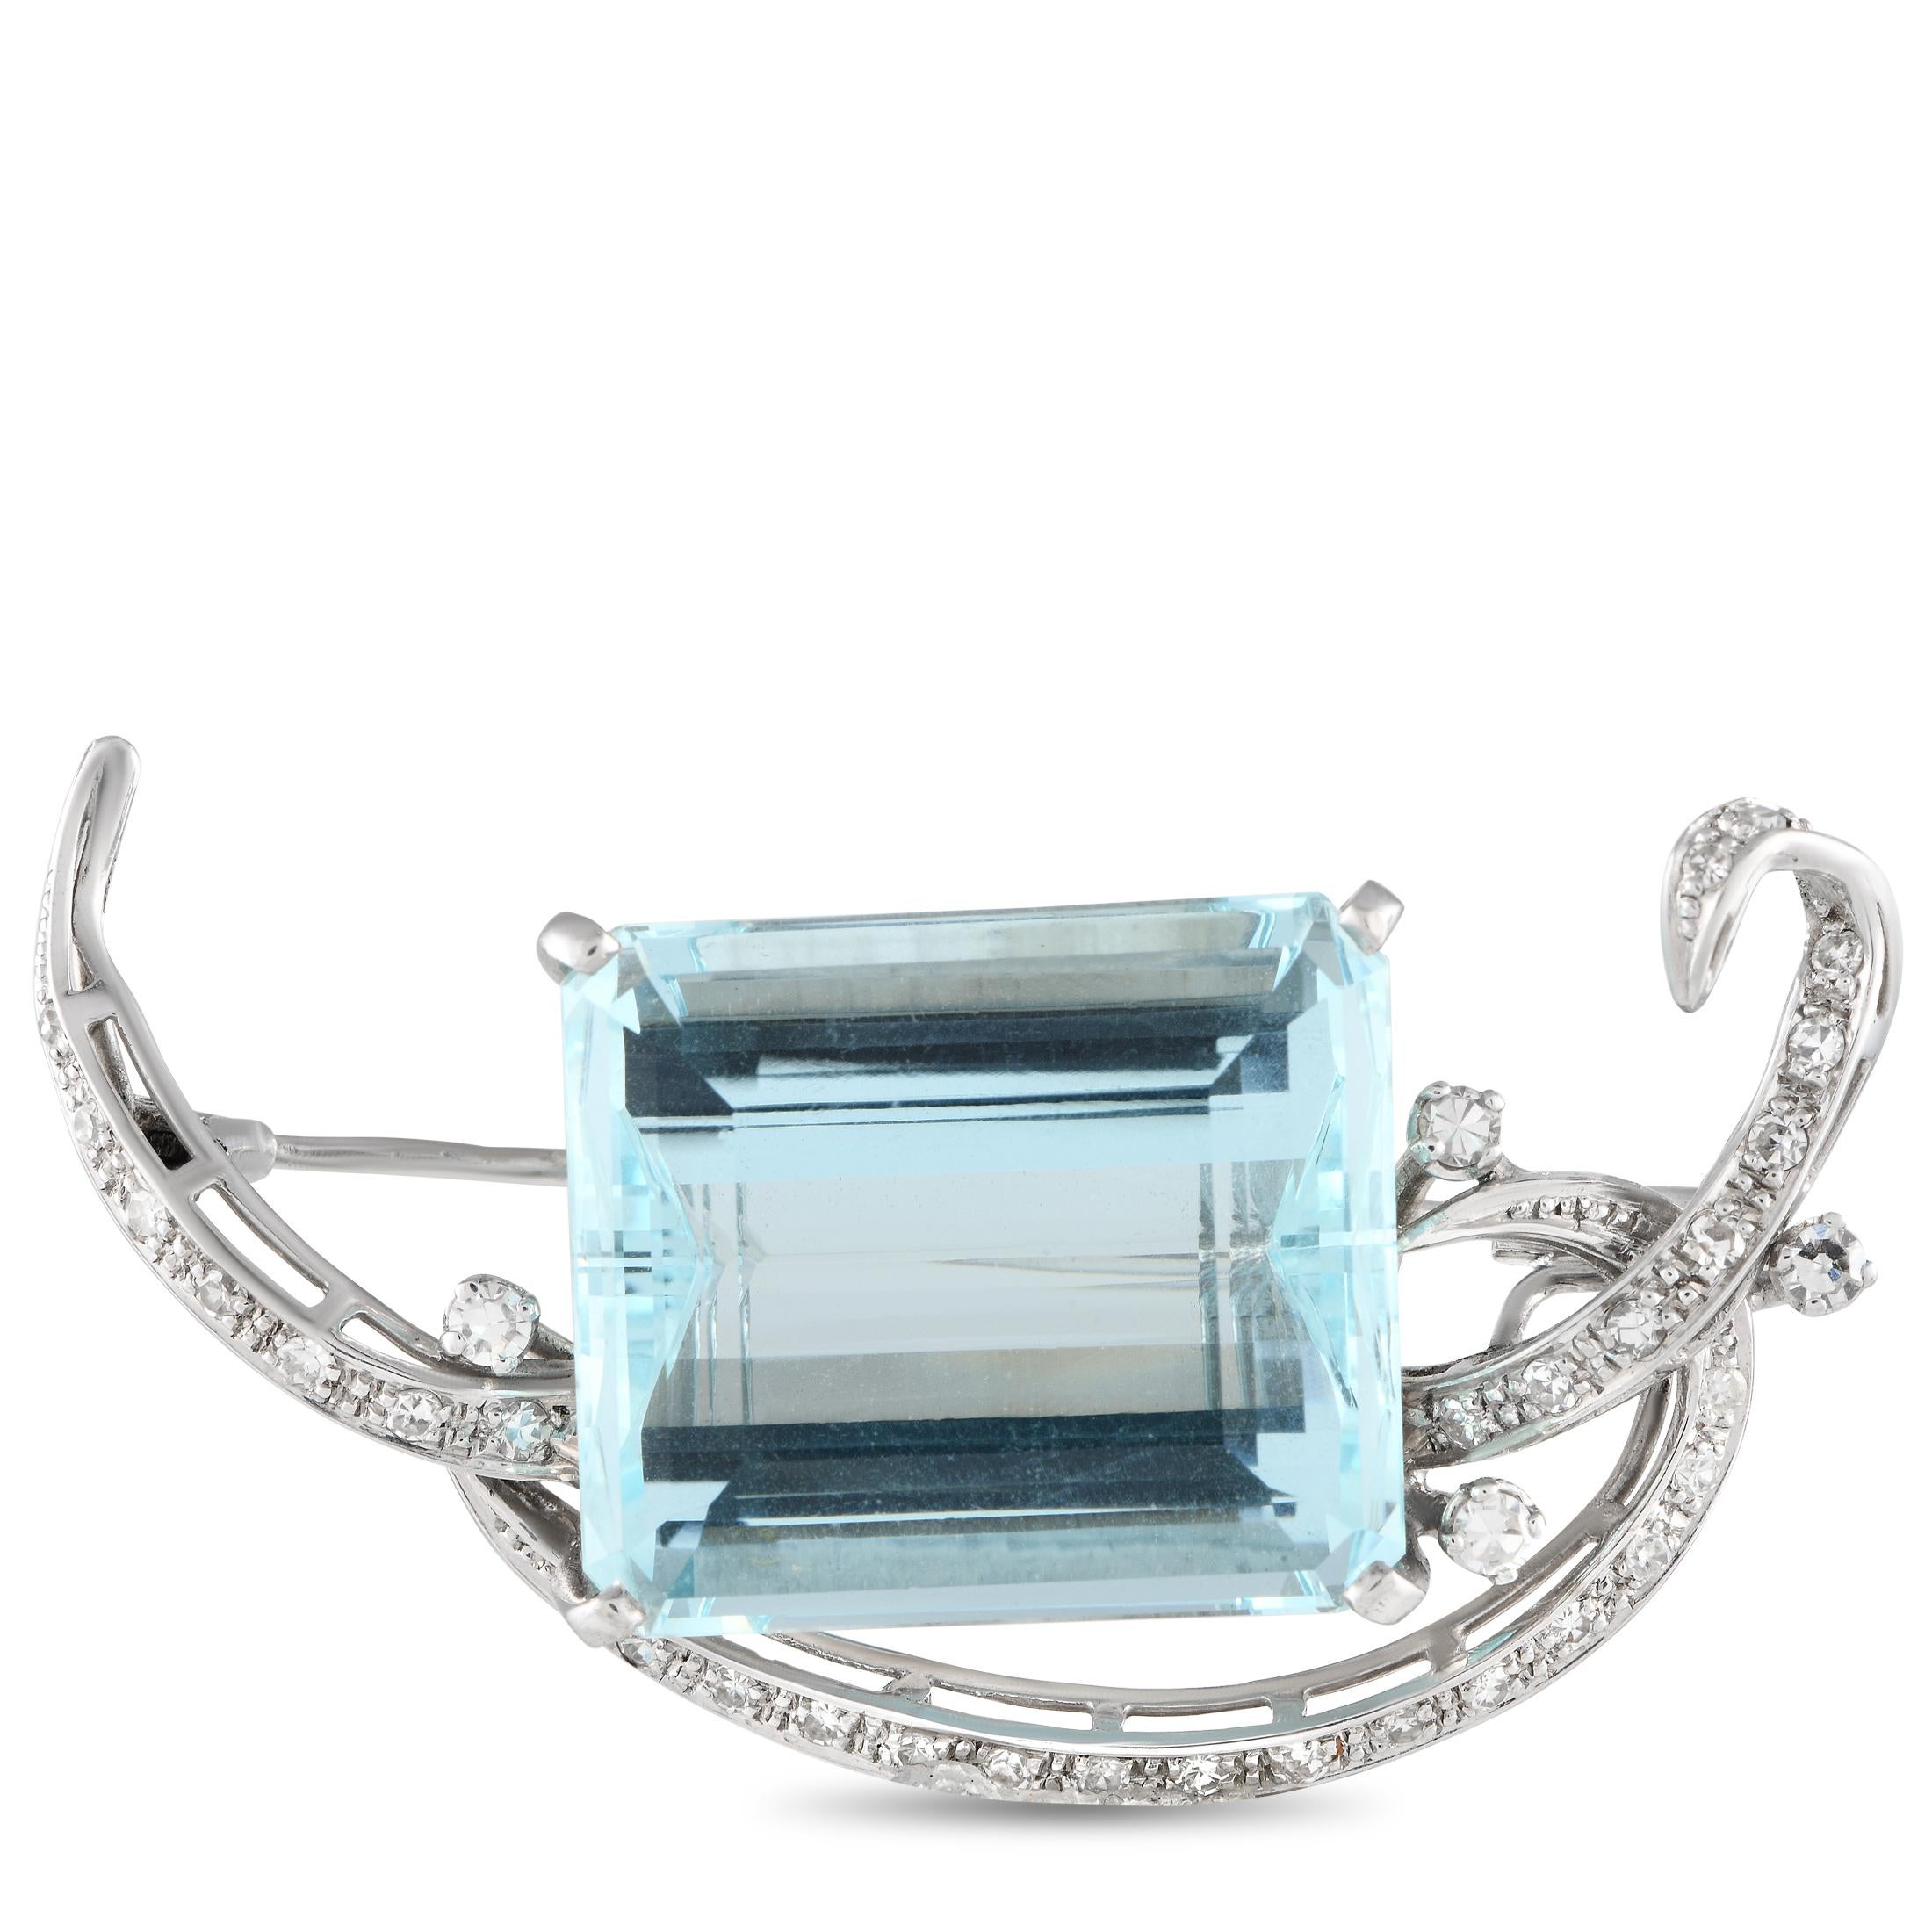 18K White Gold 0.55ct Diamond and Aquamarine Brooch MF26-012324 In Excellent Condition For Sale In Southampton, PA